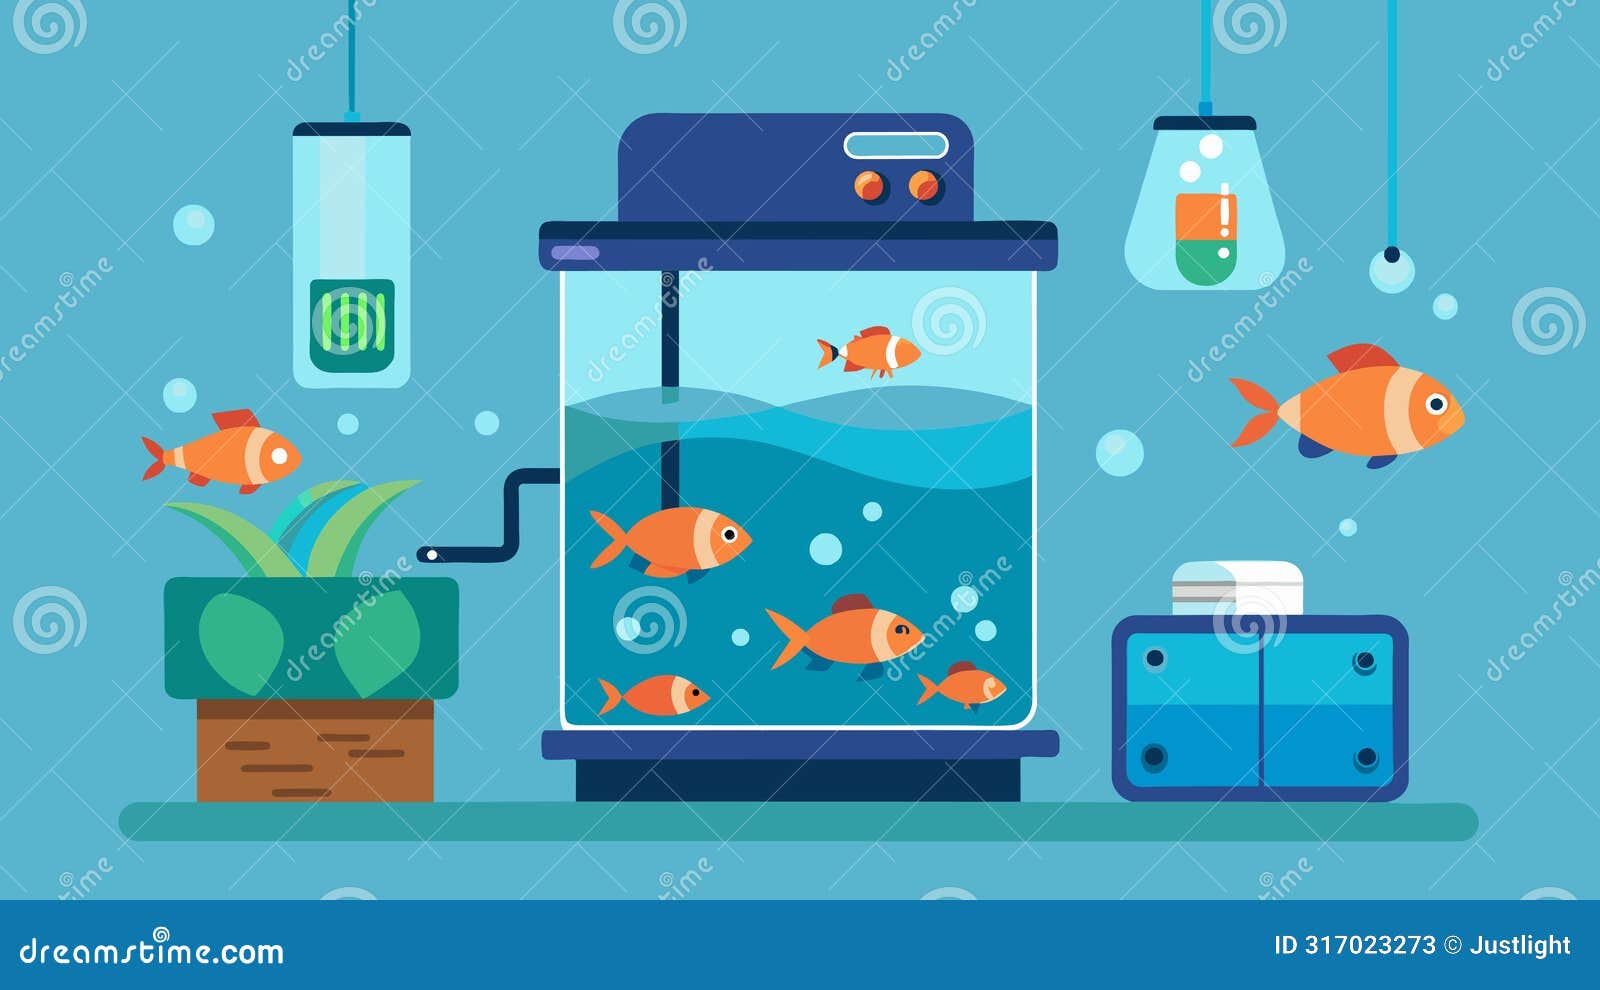 with builtin automatic feeders and water change dispensers this smart fish tank maintenance system takes the hassle out